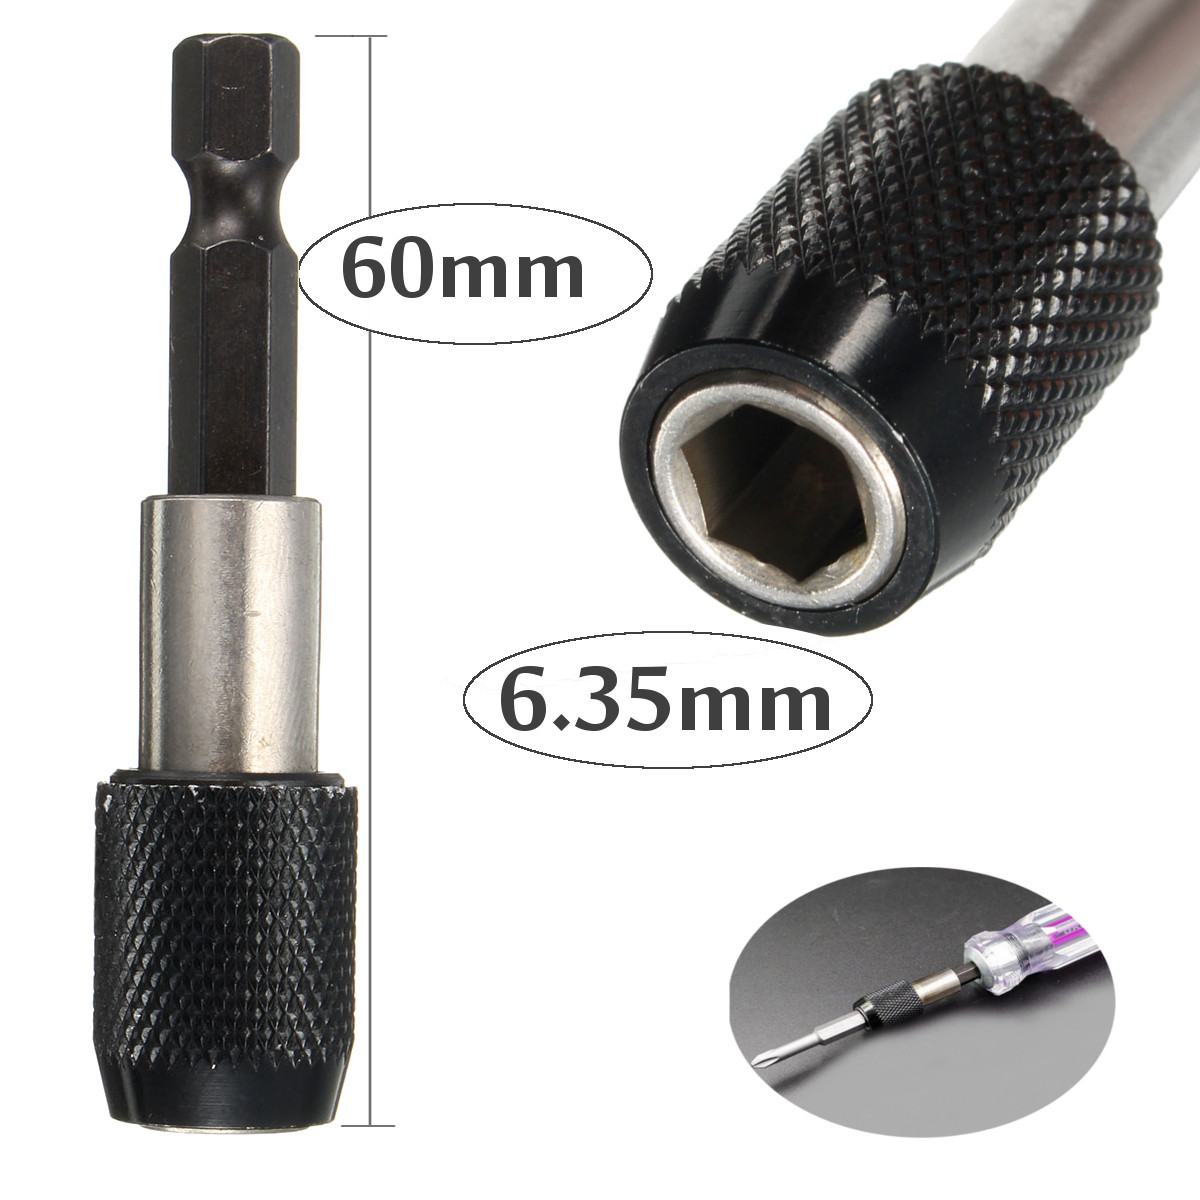 Details about   60mm Quick Release Bit Holder Suitable for all 1/4” Hex Screwdriver Bits 